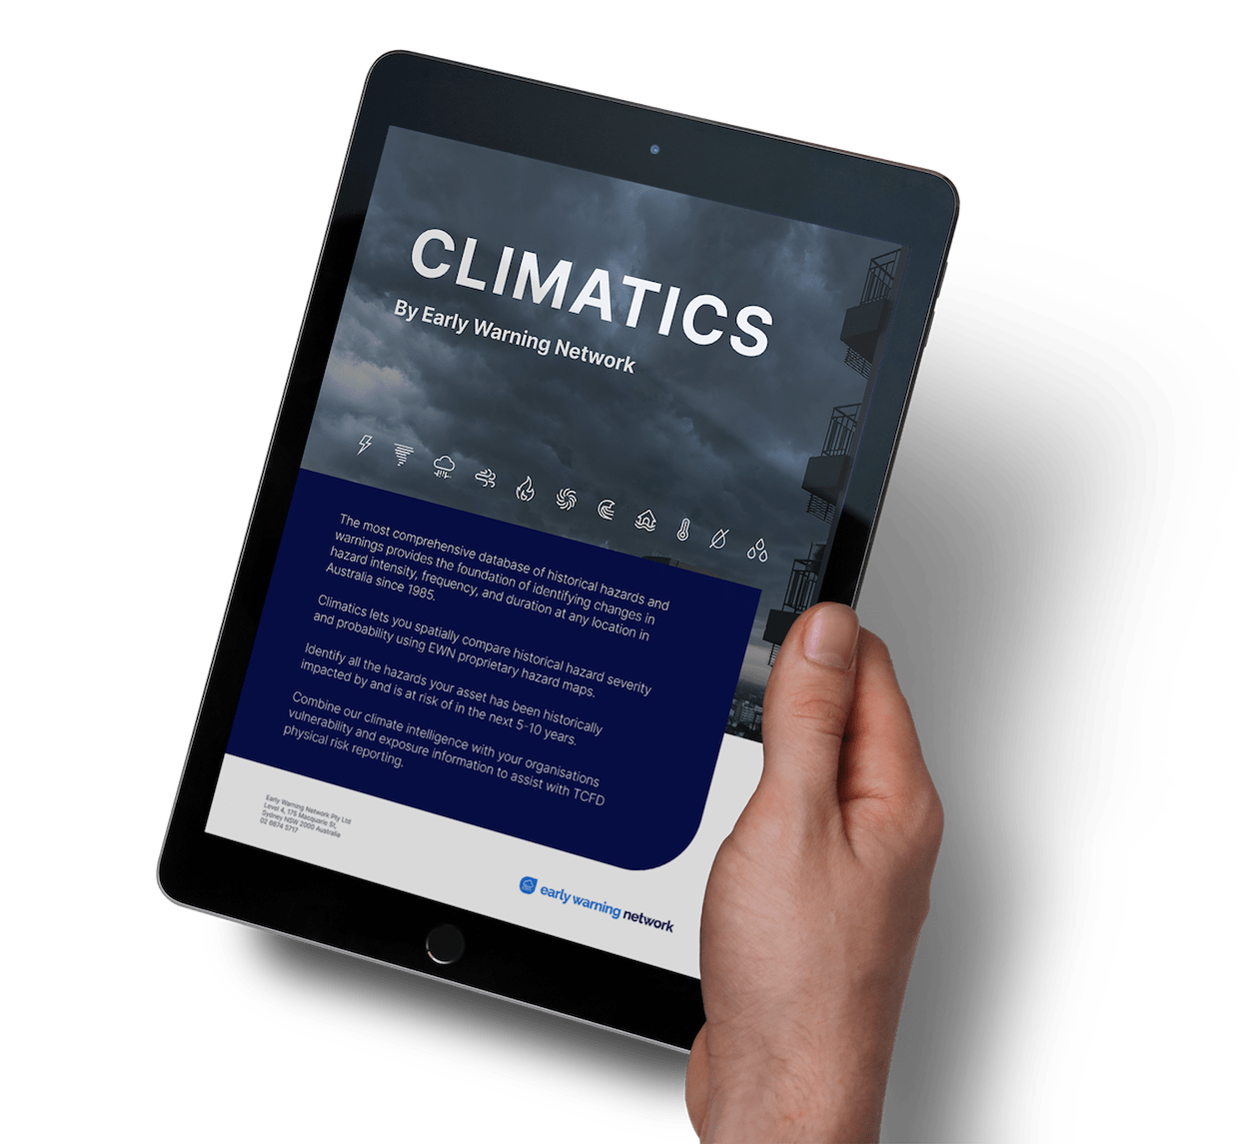 climatics page-download brochure image (1)